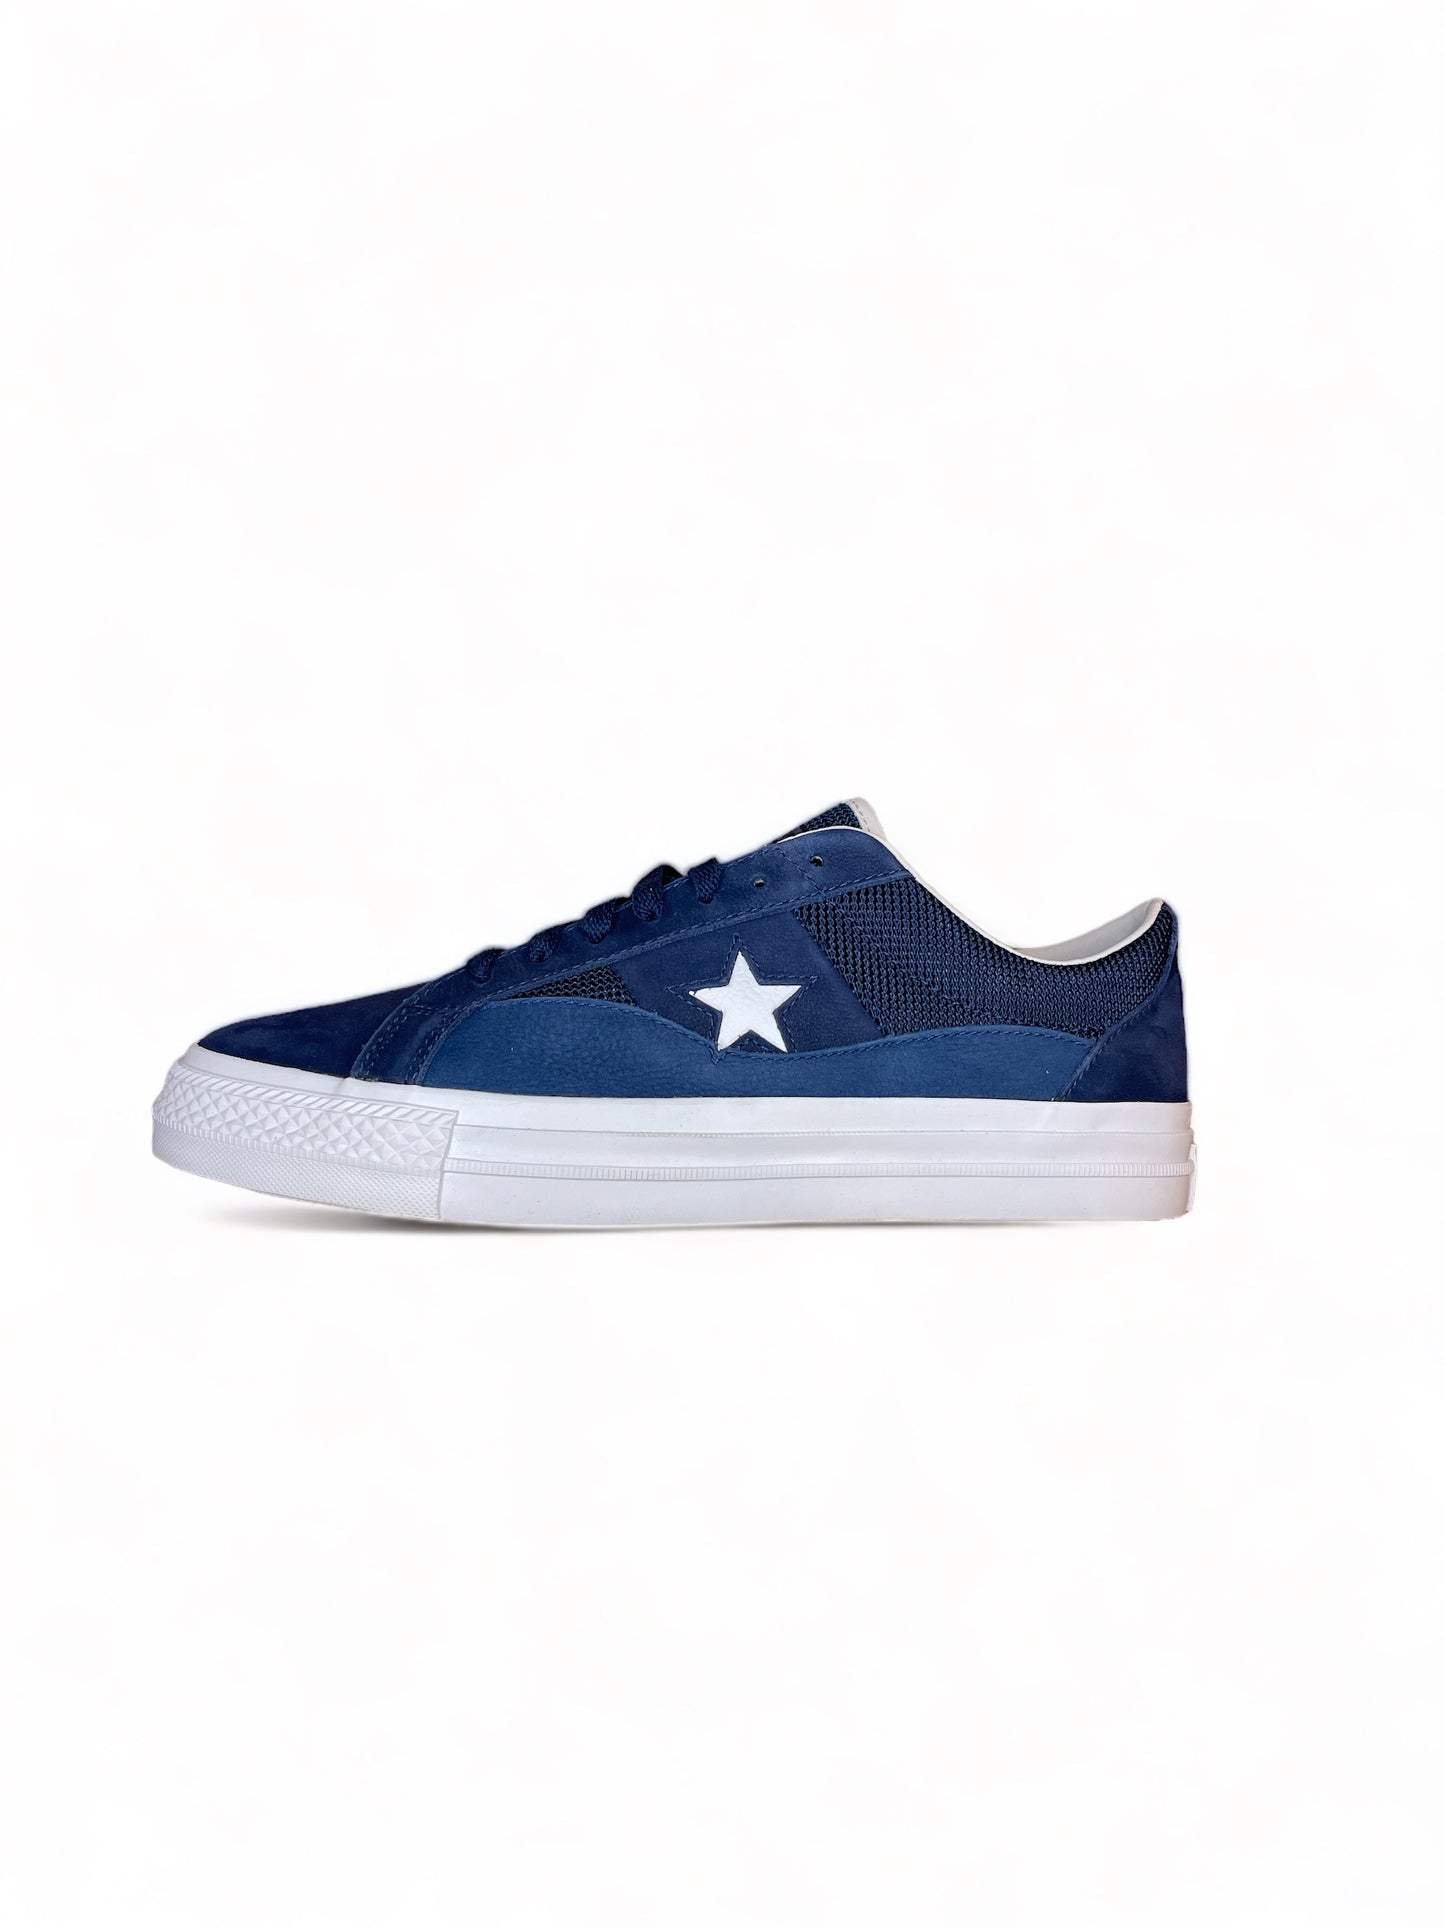 Converse One Star Pro Ox (Alltimers)